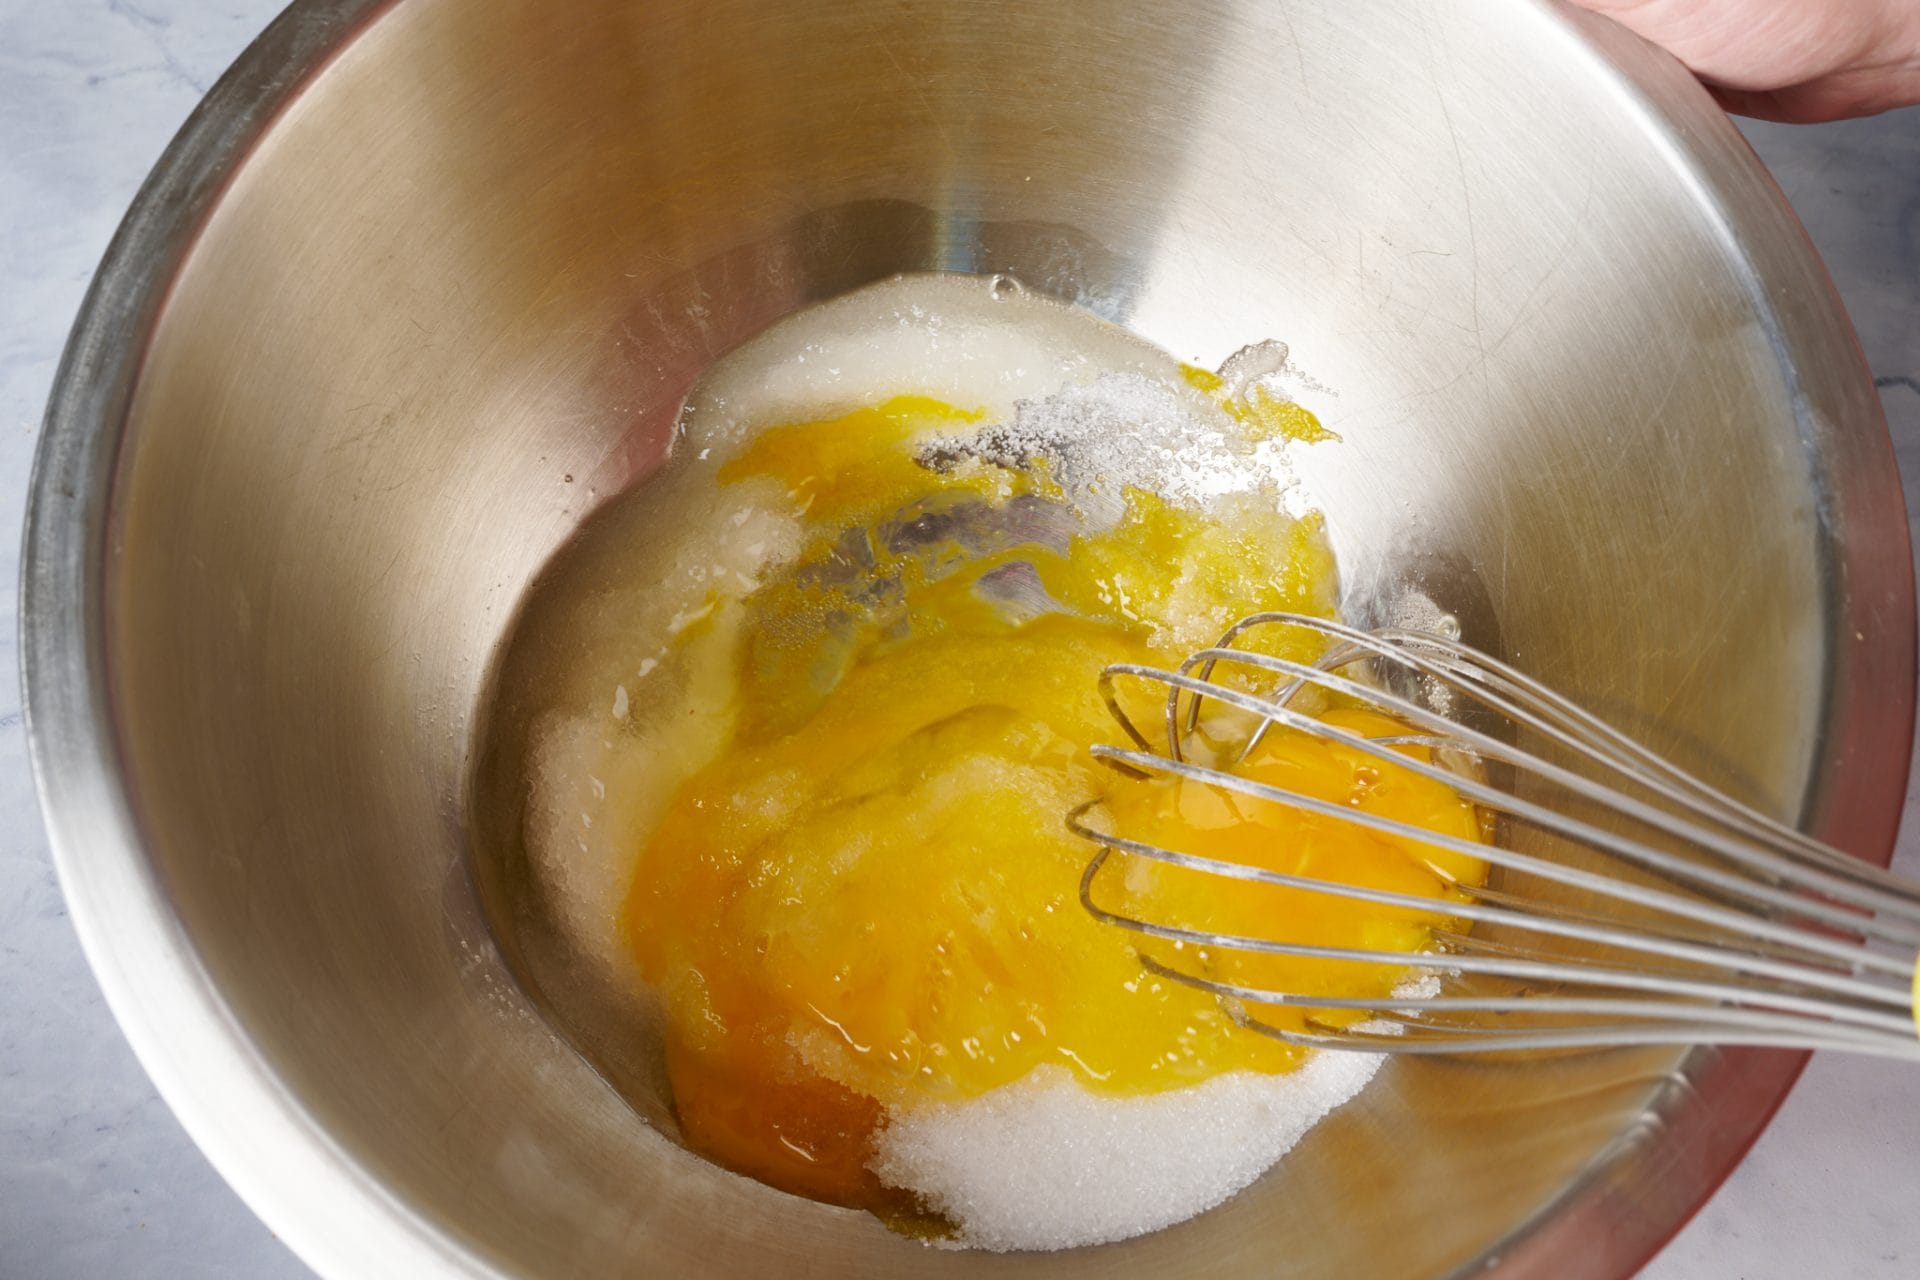 Sourdough starter discard cake step by step: Mixing egg and sugar.